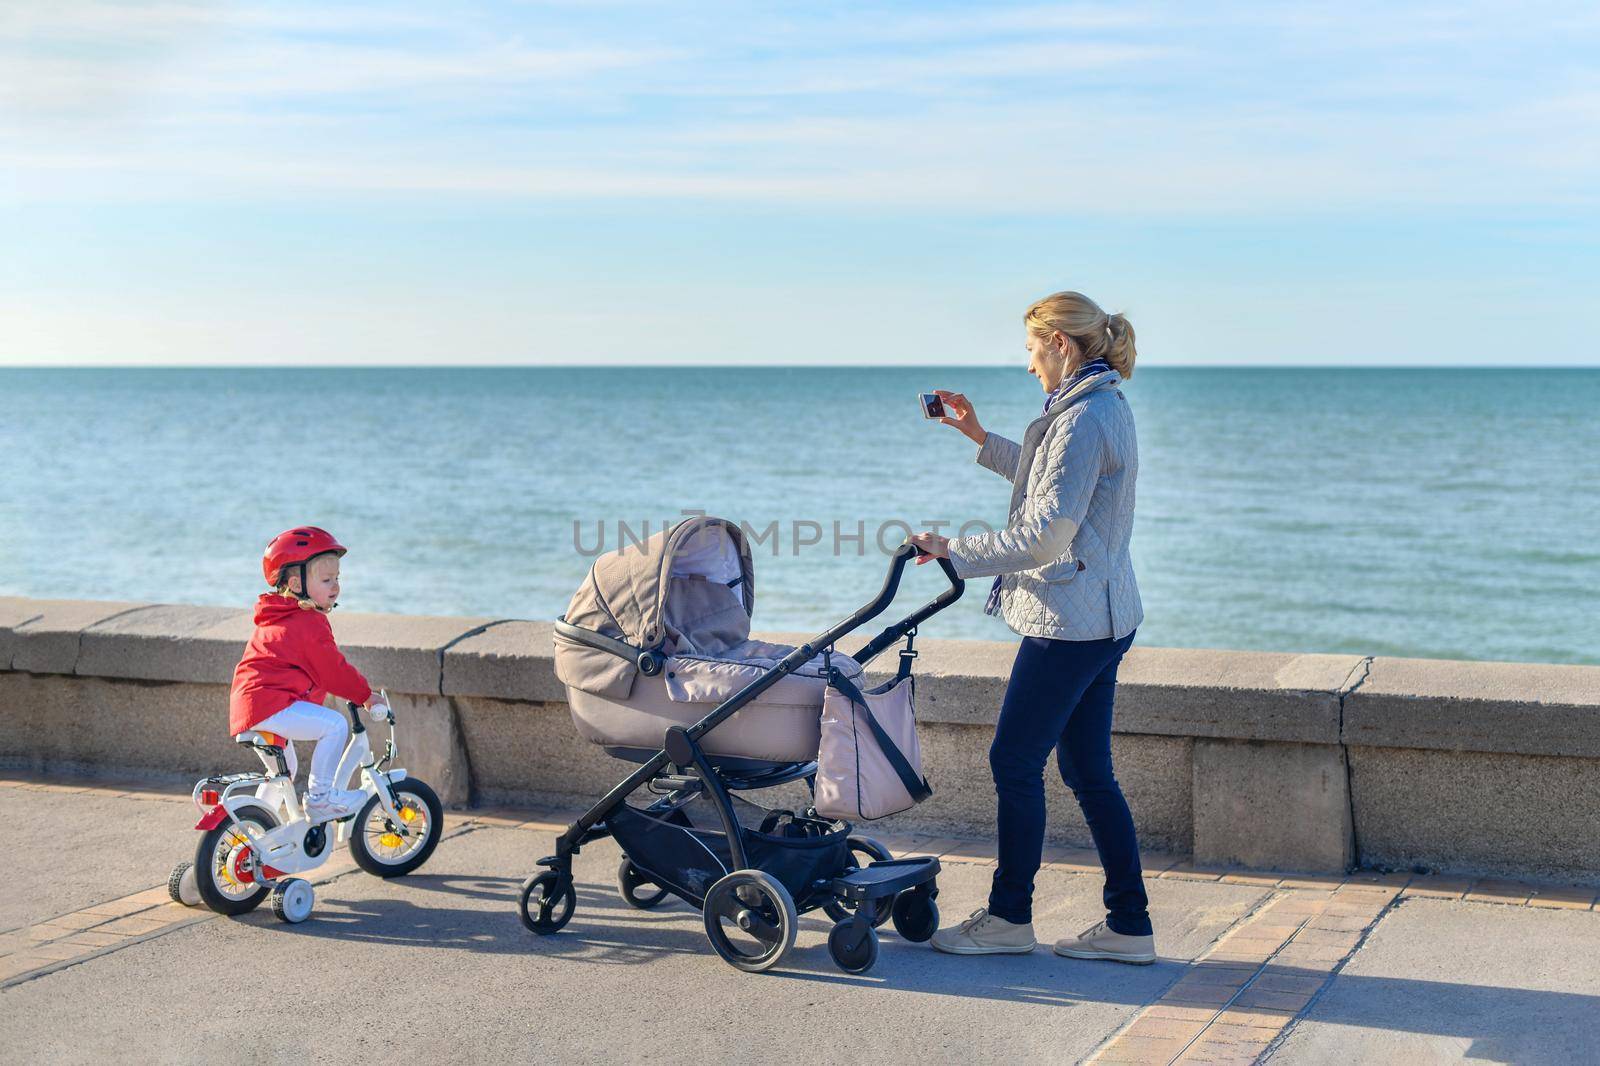 Mother with a stroller and daughter on a bicycle are walking together on the beach by Godi